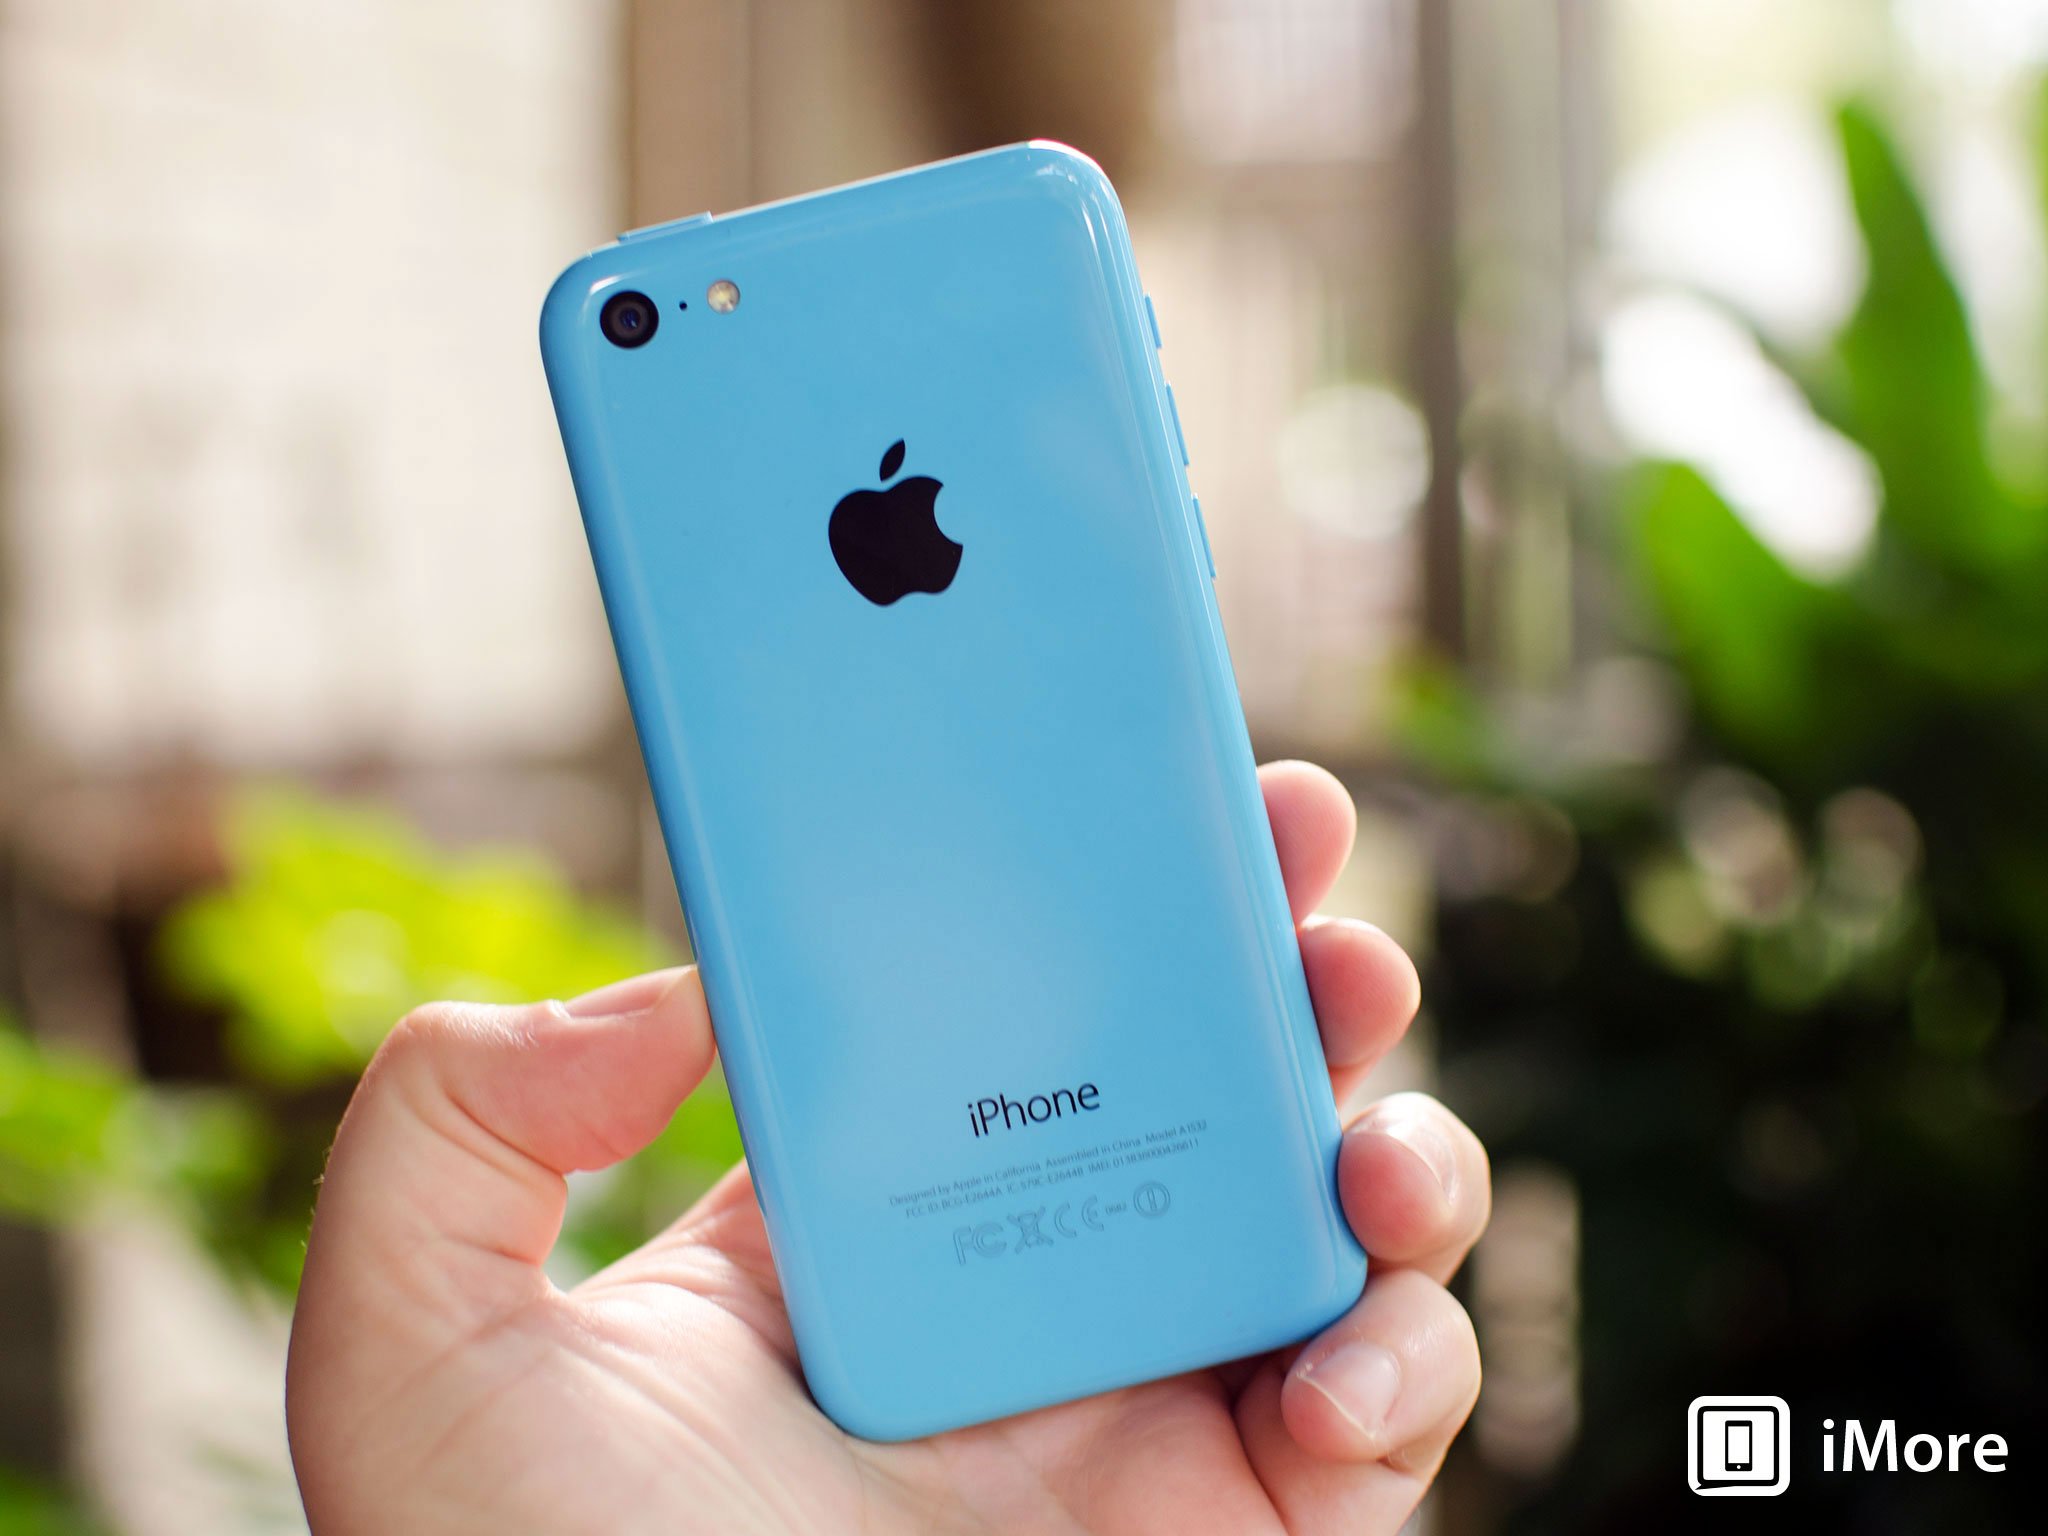 The iPhone 5c, one of many phones available via Cricket Wireless